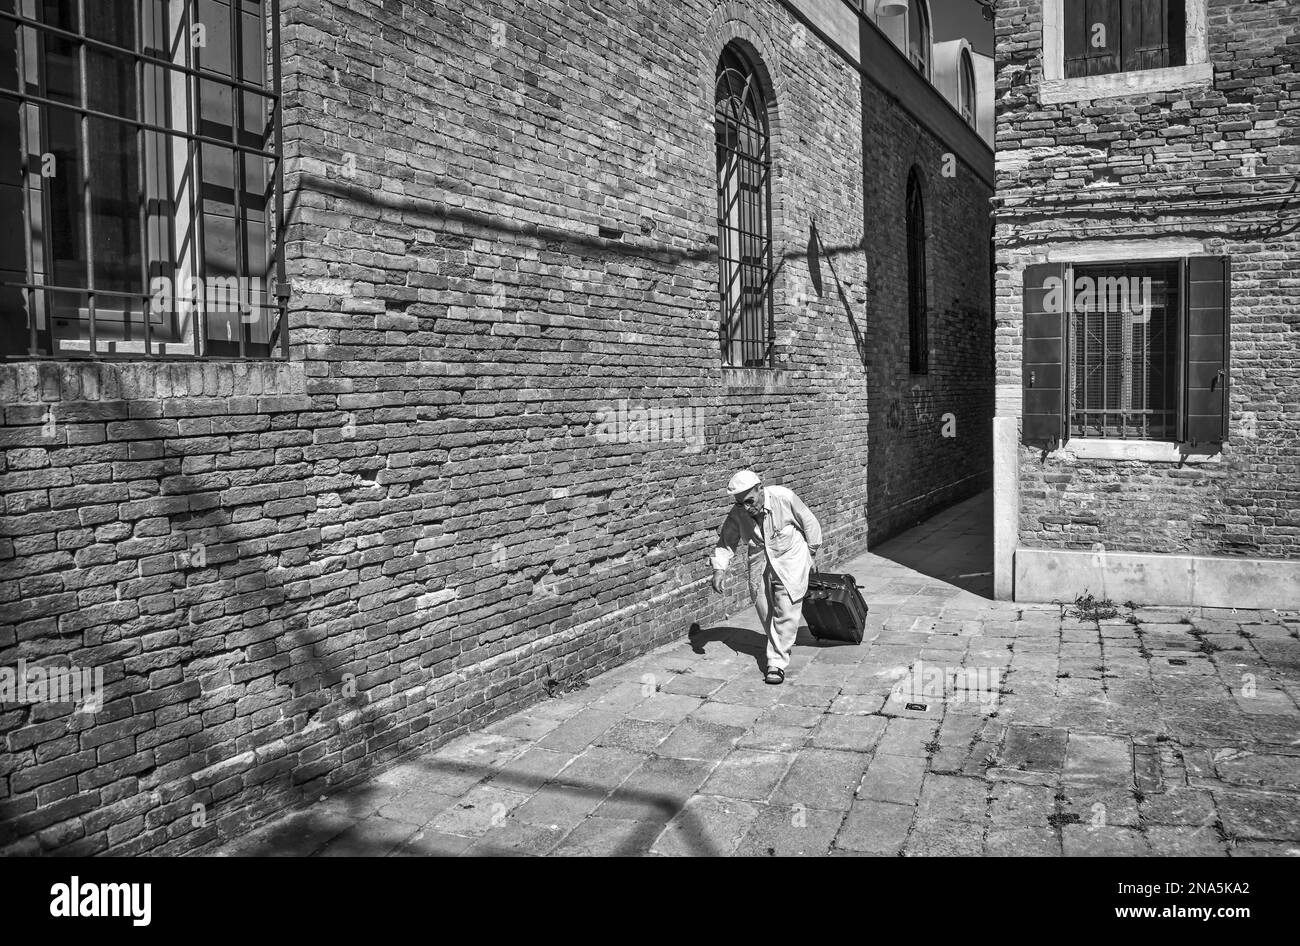 Man rolls a suitcase beside the brick wall of a building; Venice, Italy Stock Photo